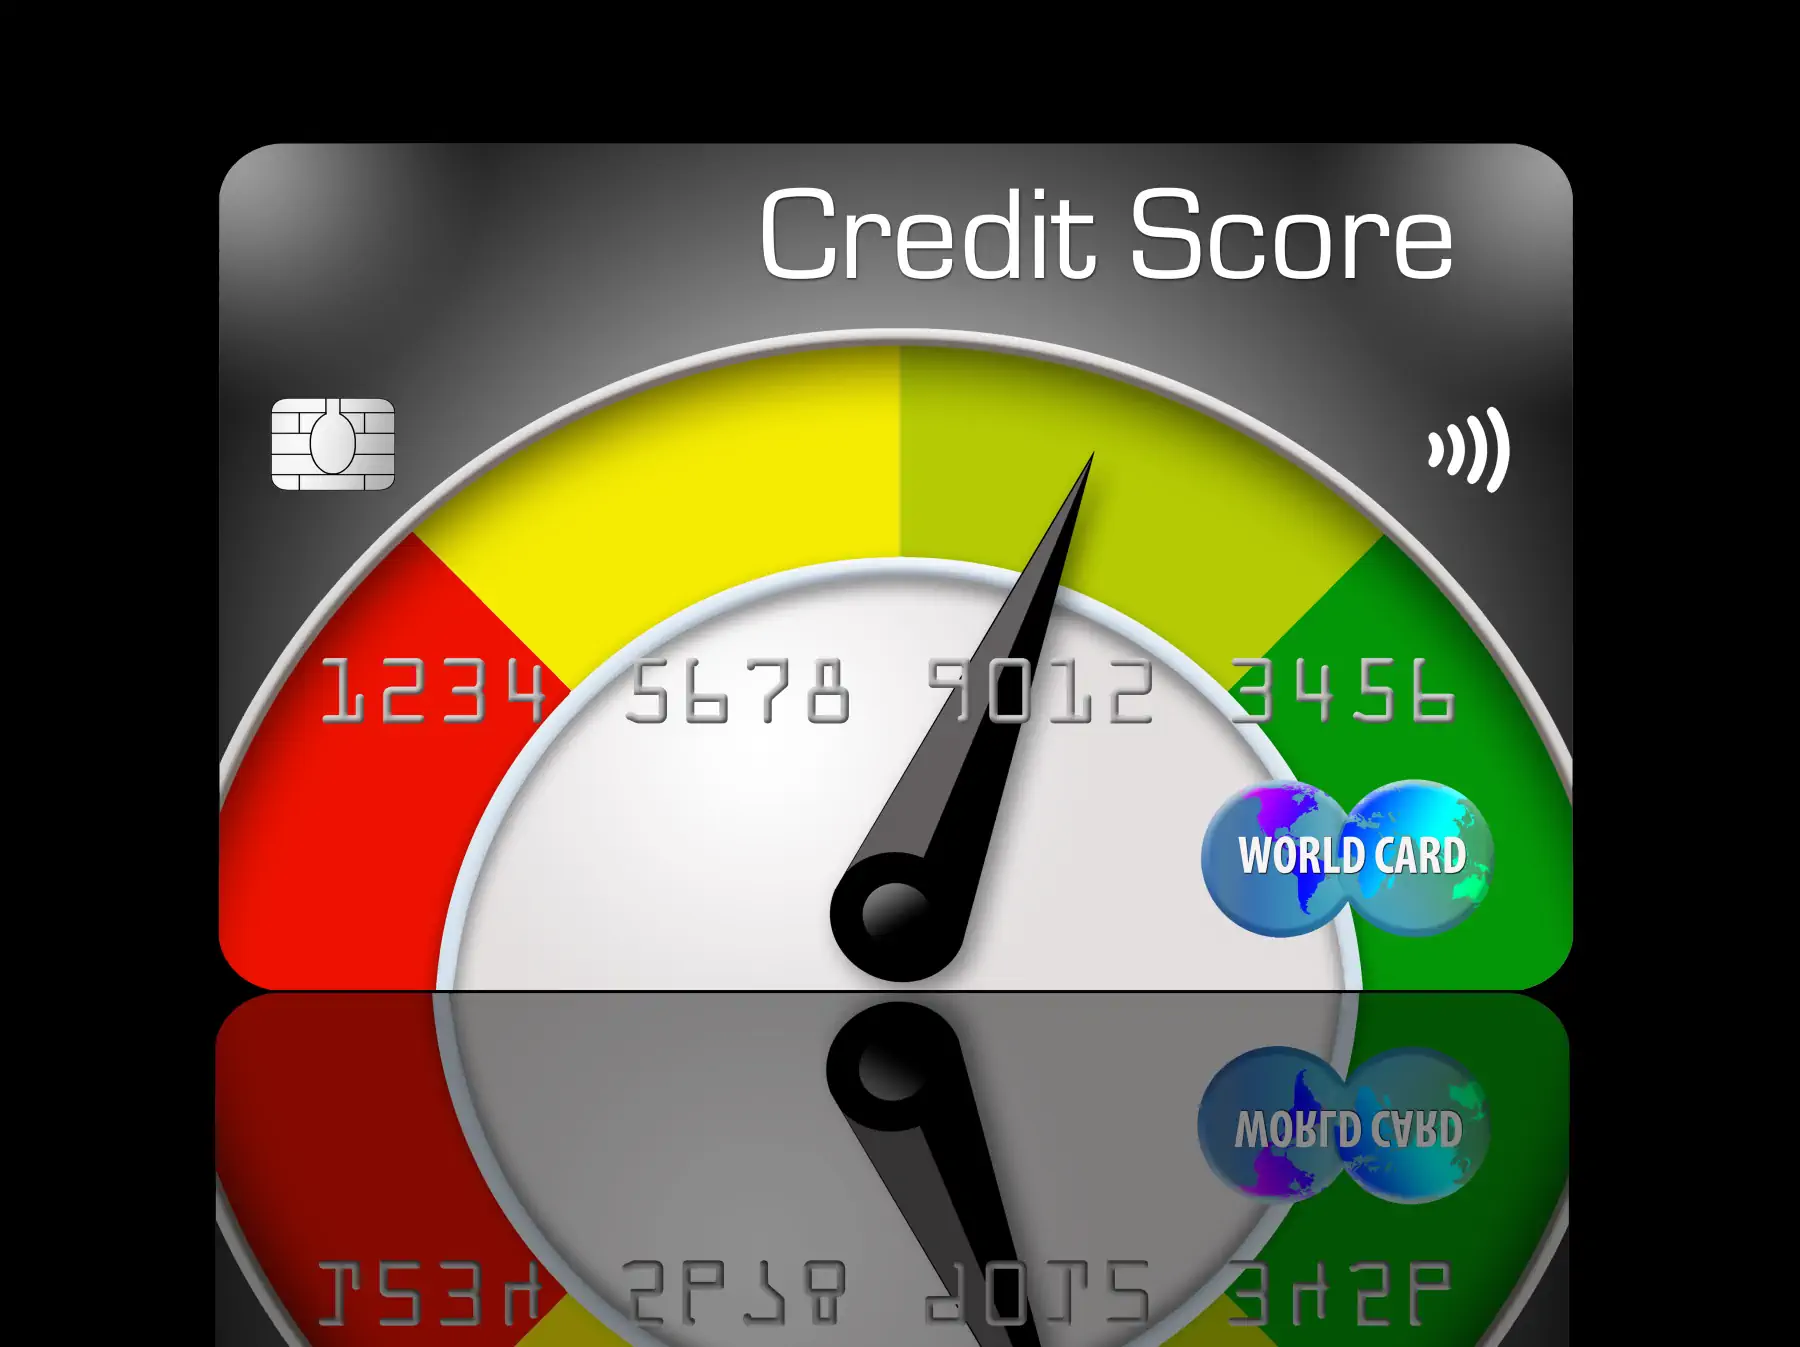 Credit Card with score dial going from red to yellow to light green to green. 